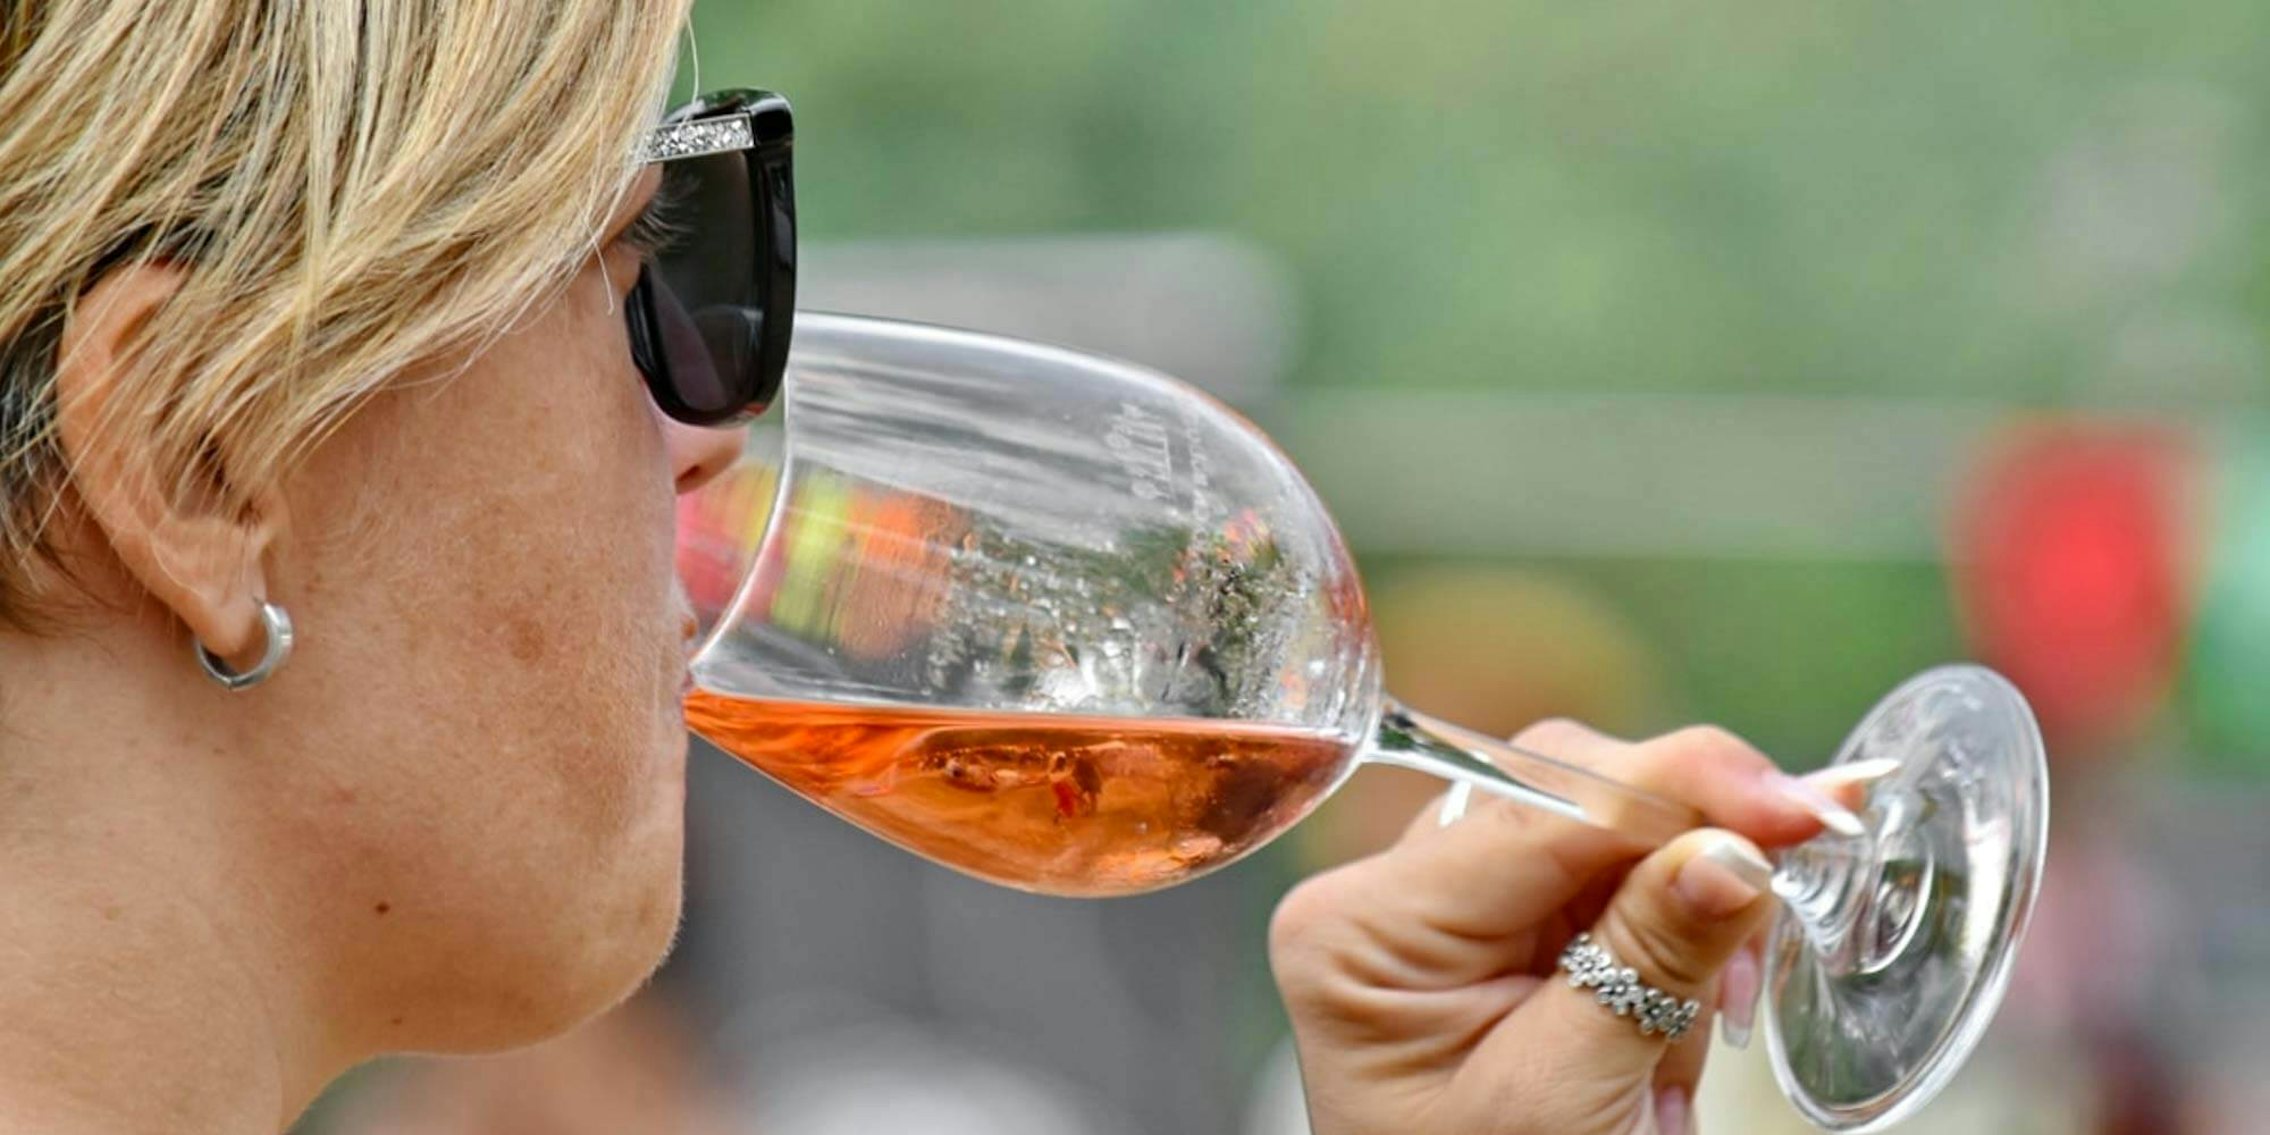 A woman with short blonde hair drinking from a wine glass